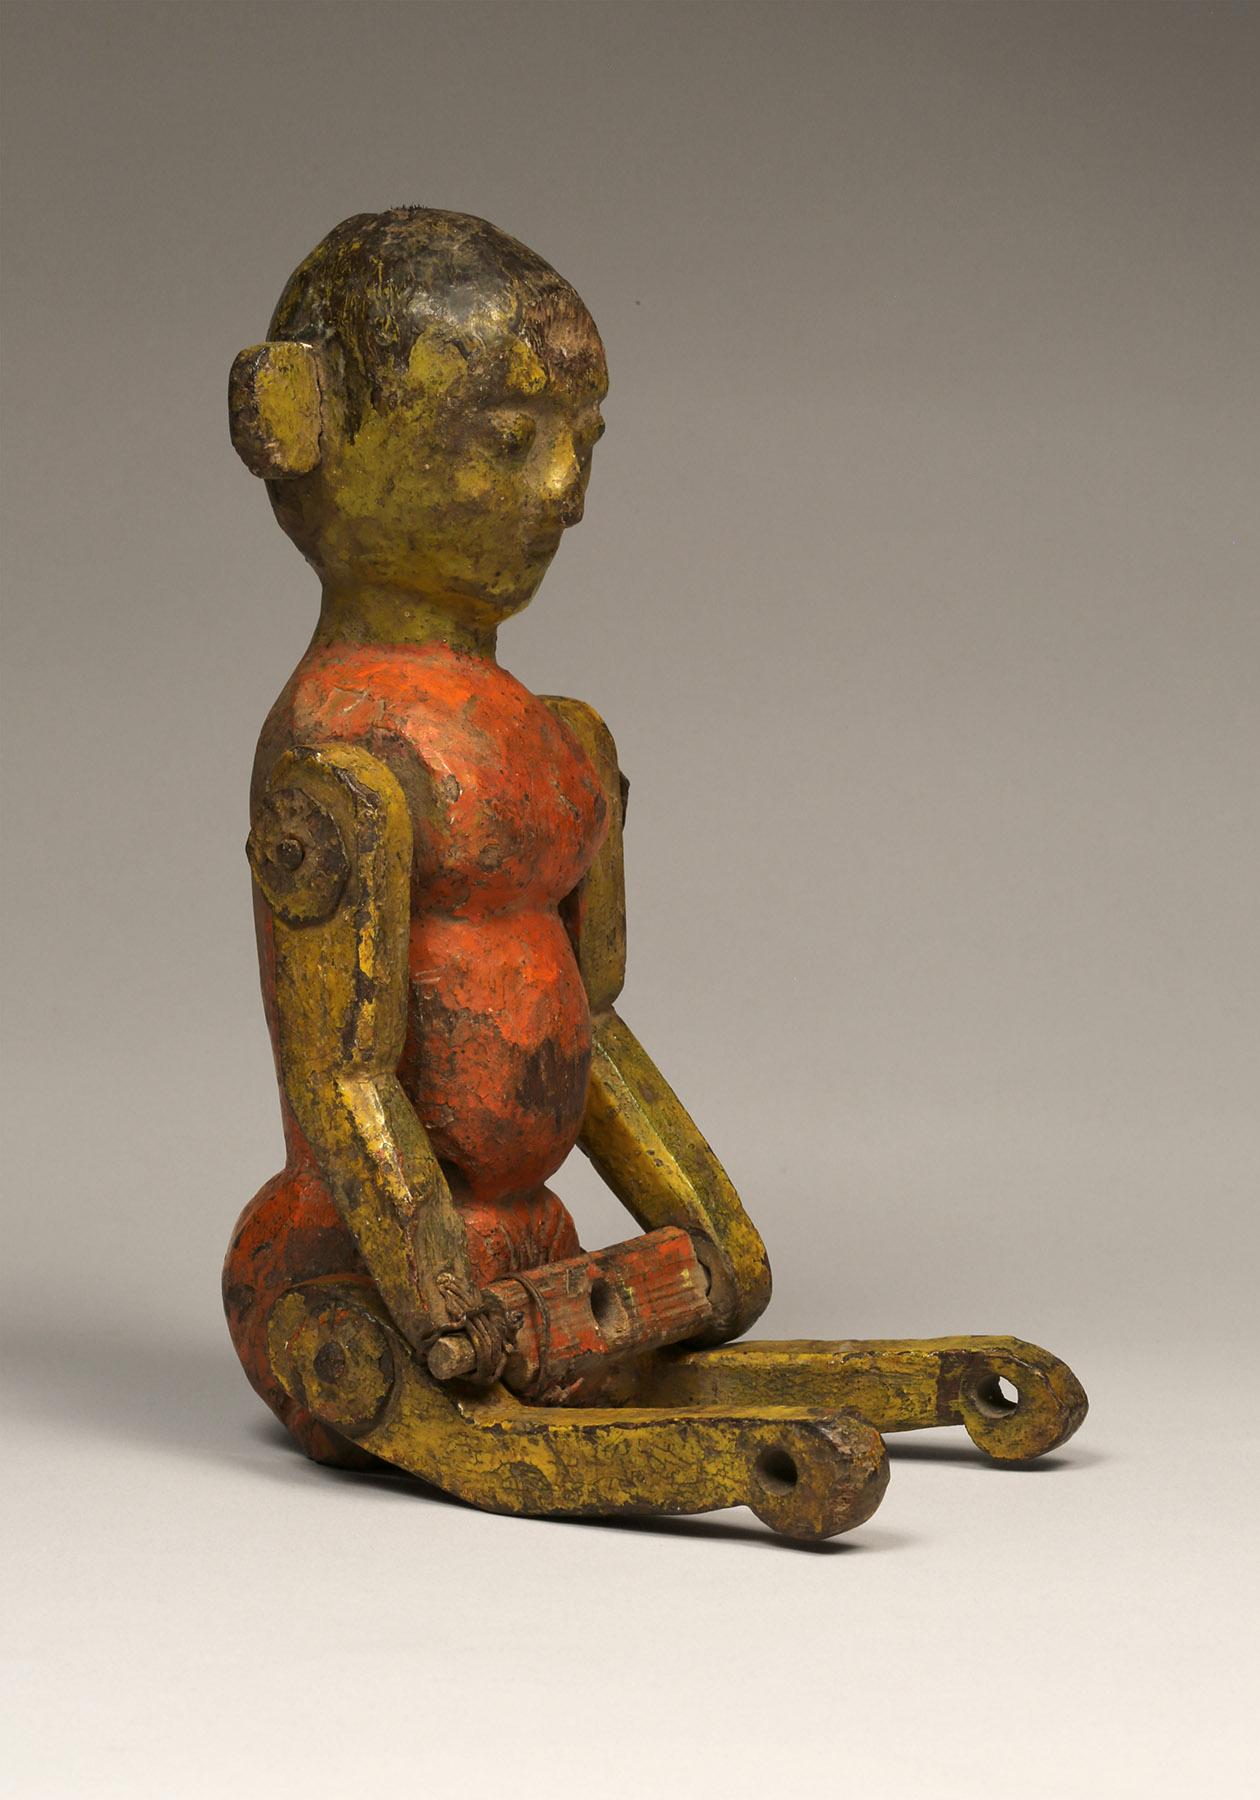 Wooden Child's Toy 
South India 
Ca 1920 
Wood, polychrome paint 
Measure: H: 11 in

Indian wooden doll possibly used as an oscillating pole toy.